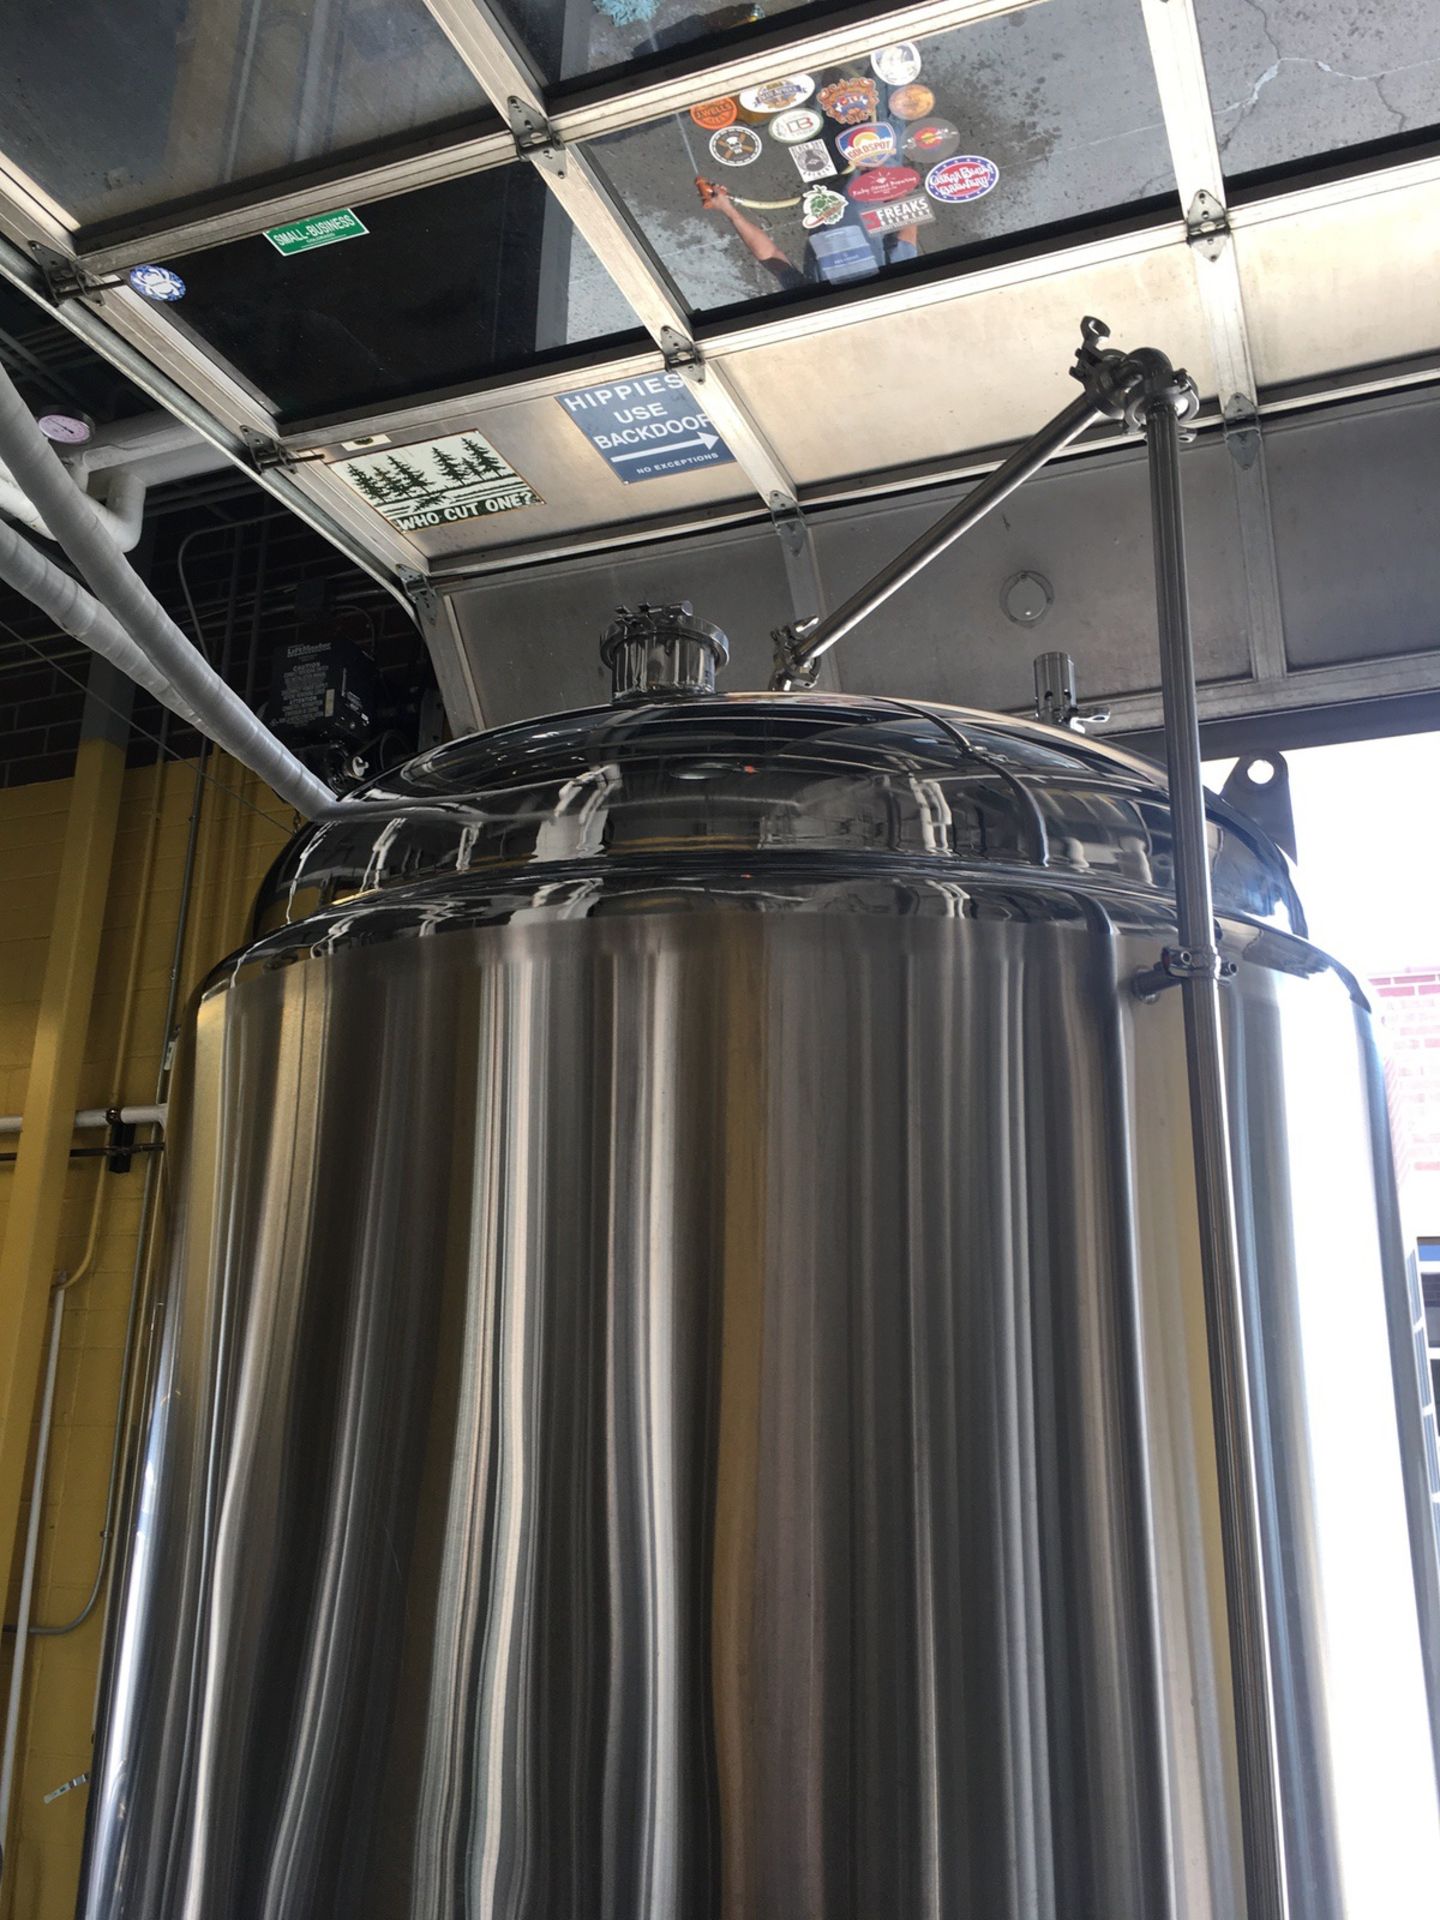 2015 Stout 14 BBL Fermentation Vessel, Stainless Steel, Glycol J | Subject to Bulk | Rig Fee: $350 - Image 5 of 9